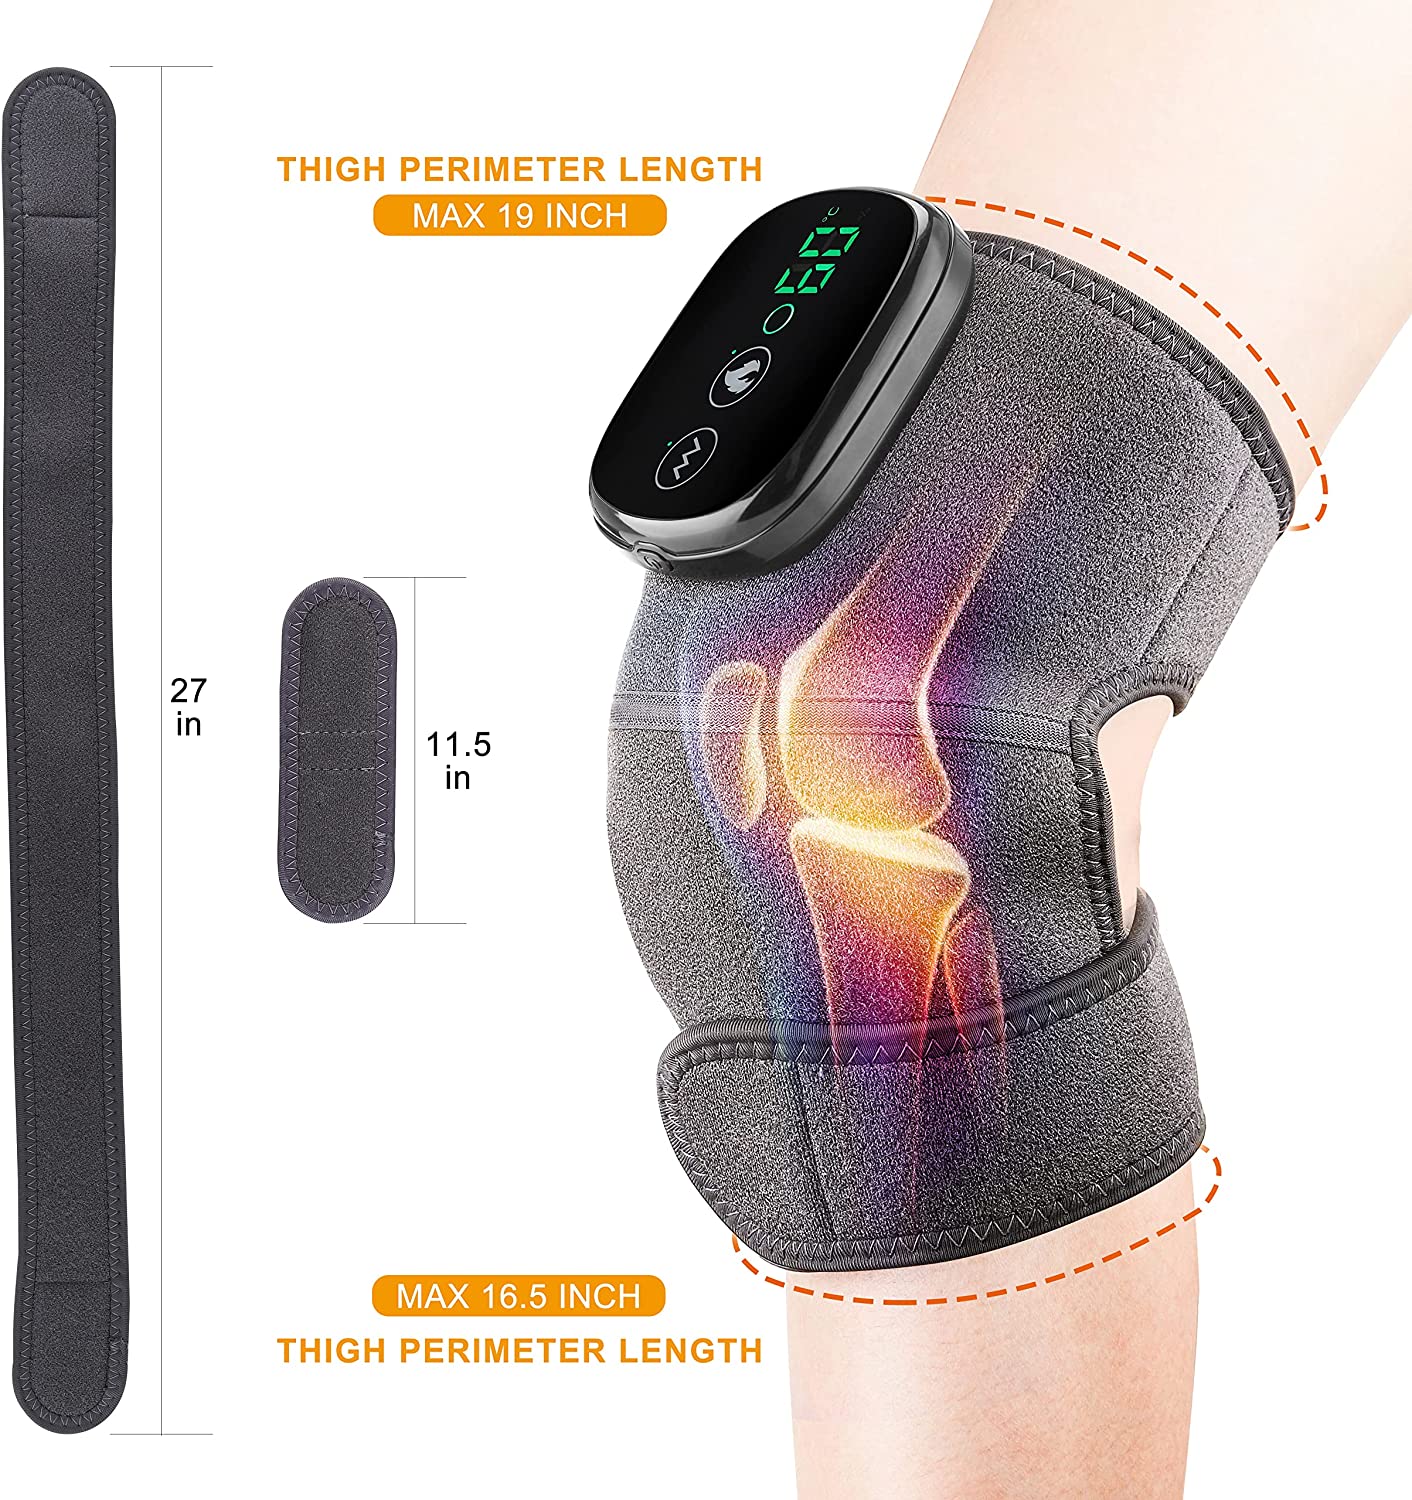 New Heating Knee Pads for Arthritis Knee Pain Relief USB Electric